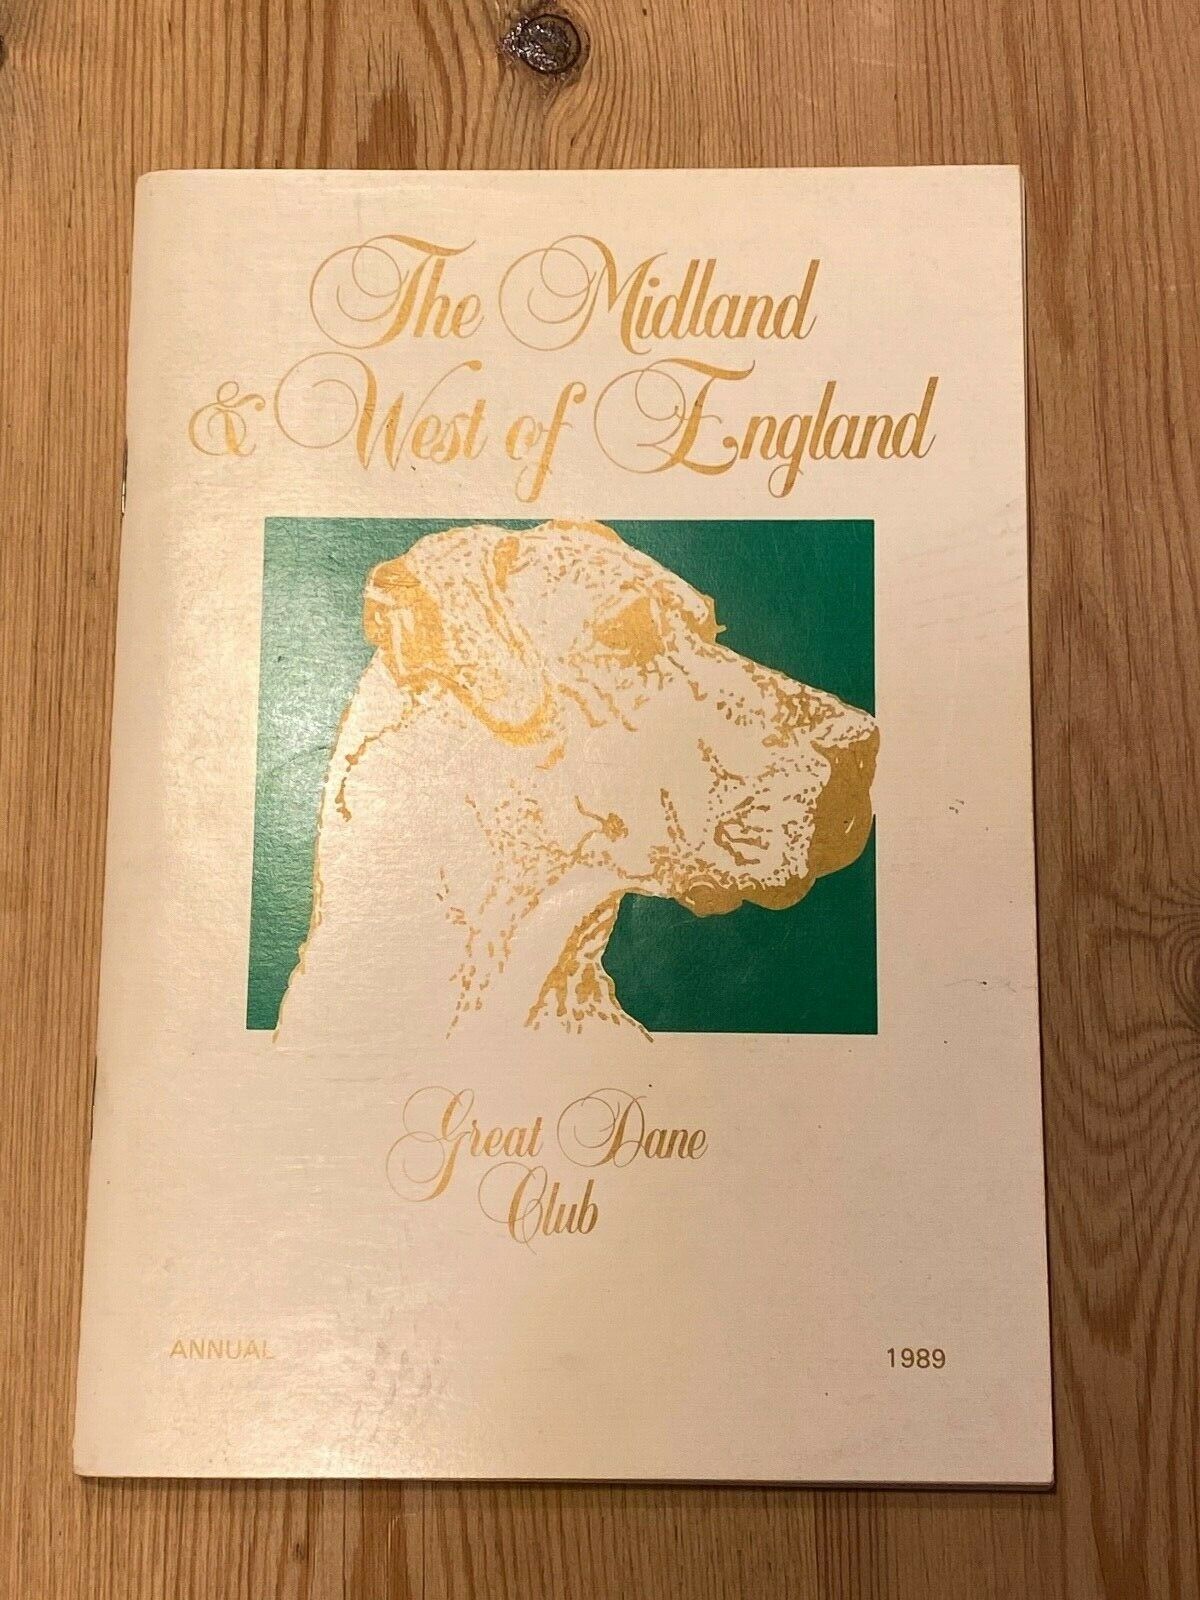 Rare Great Dane Dog Book Midland & West Of England Annual 1989 120 Pages Illus